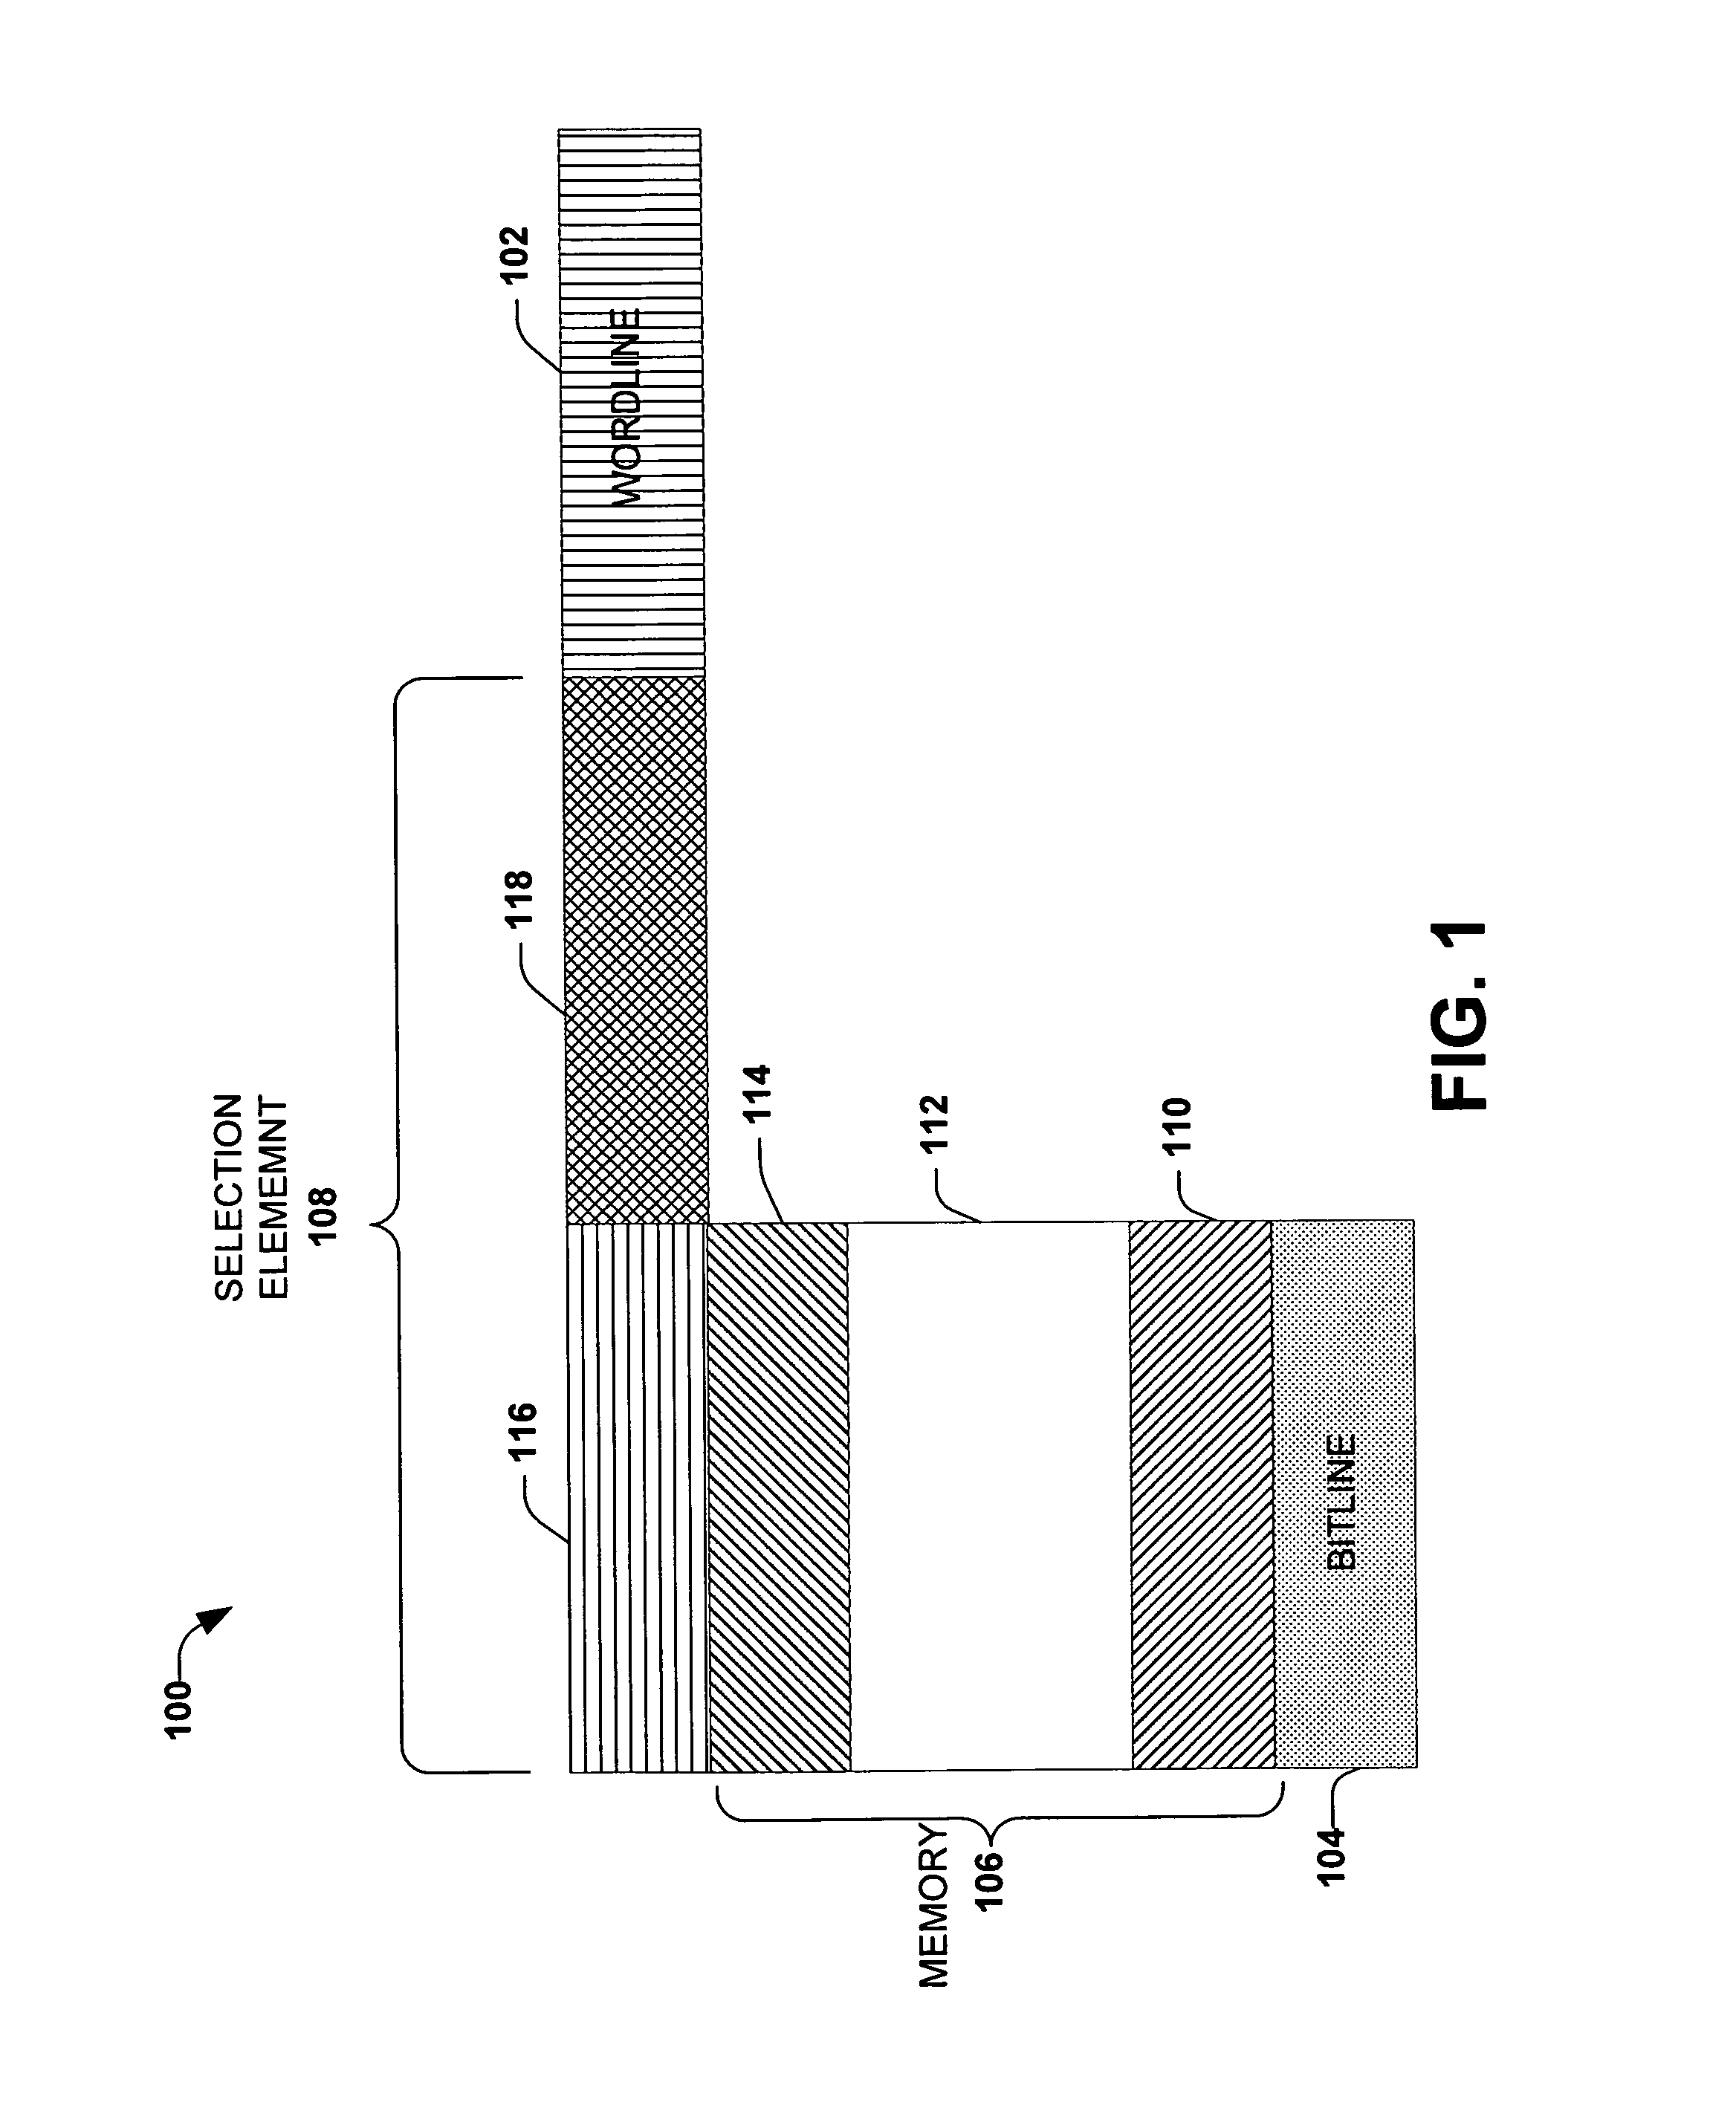 Memory device with a selection element and a control line in a substantially similar layer